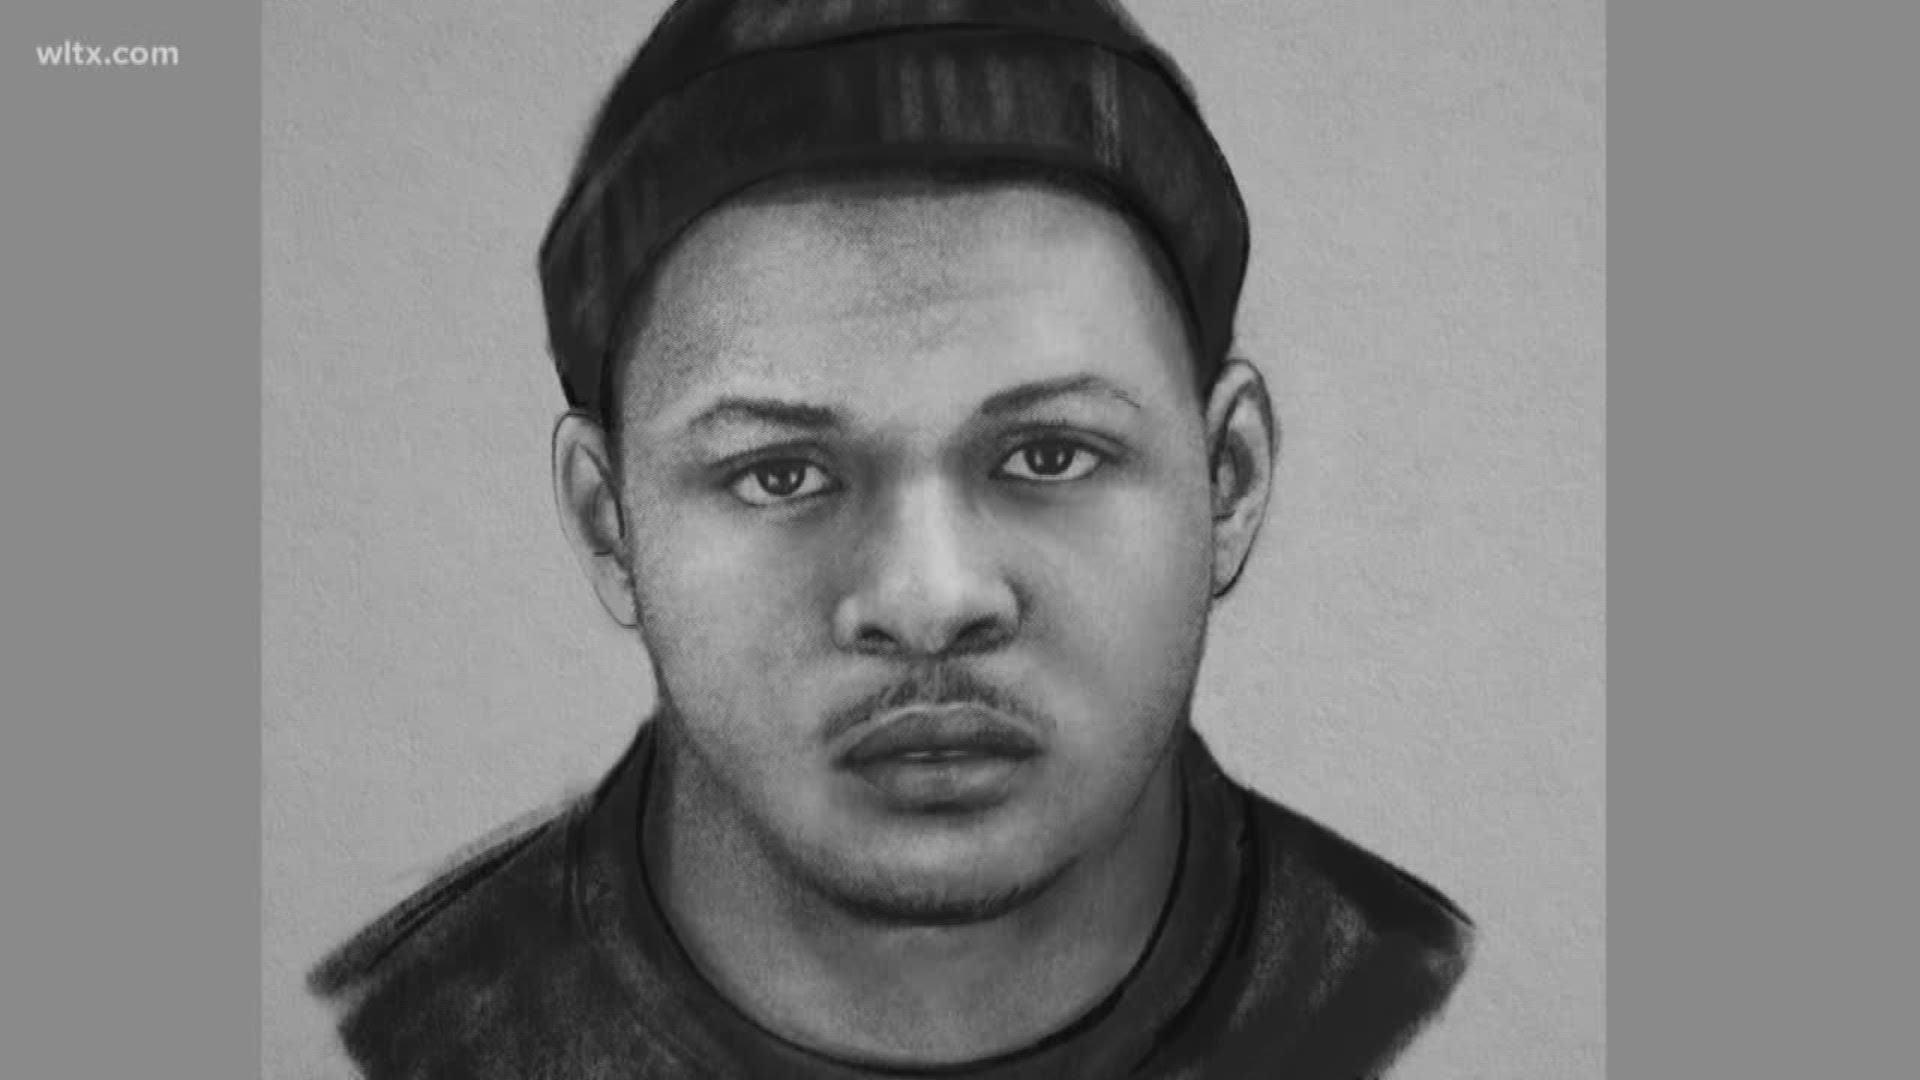 Columbia Police released the sketch of a suspect they are looking for following a murder at an apartment complex.